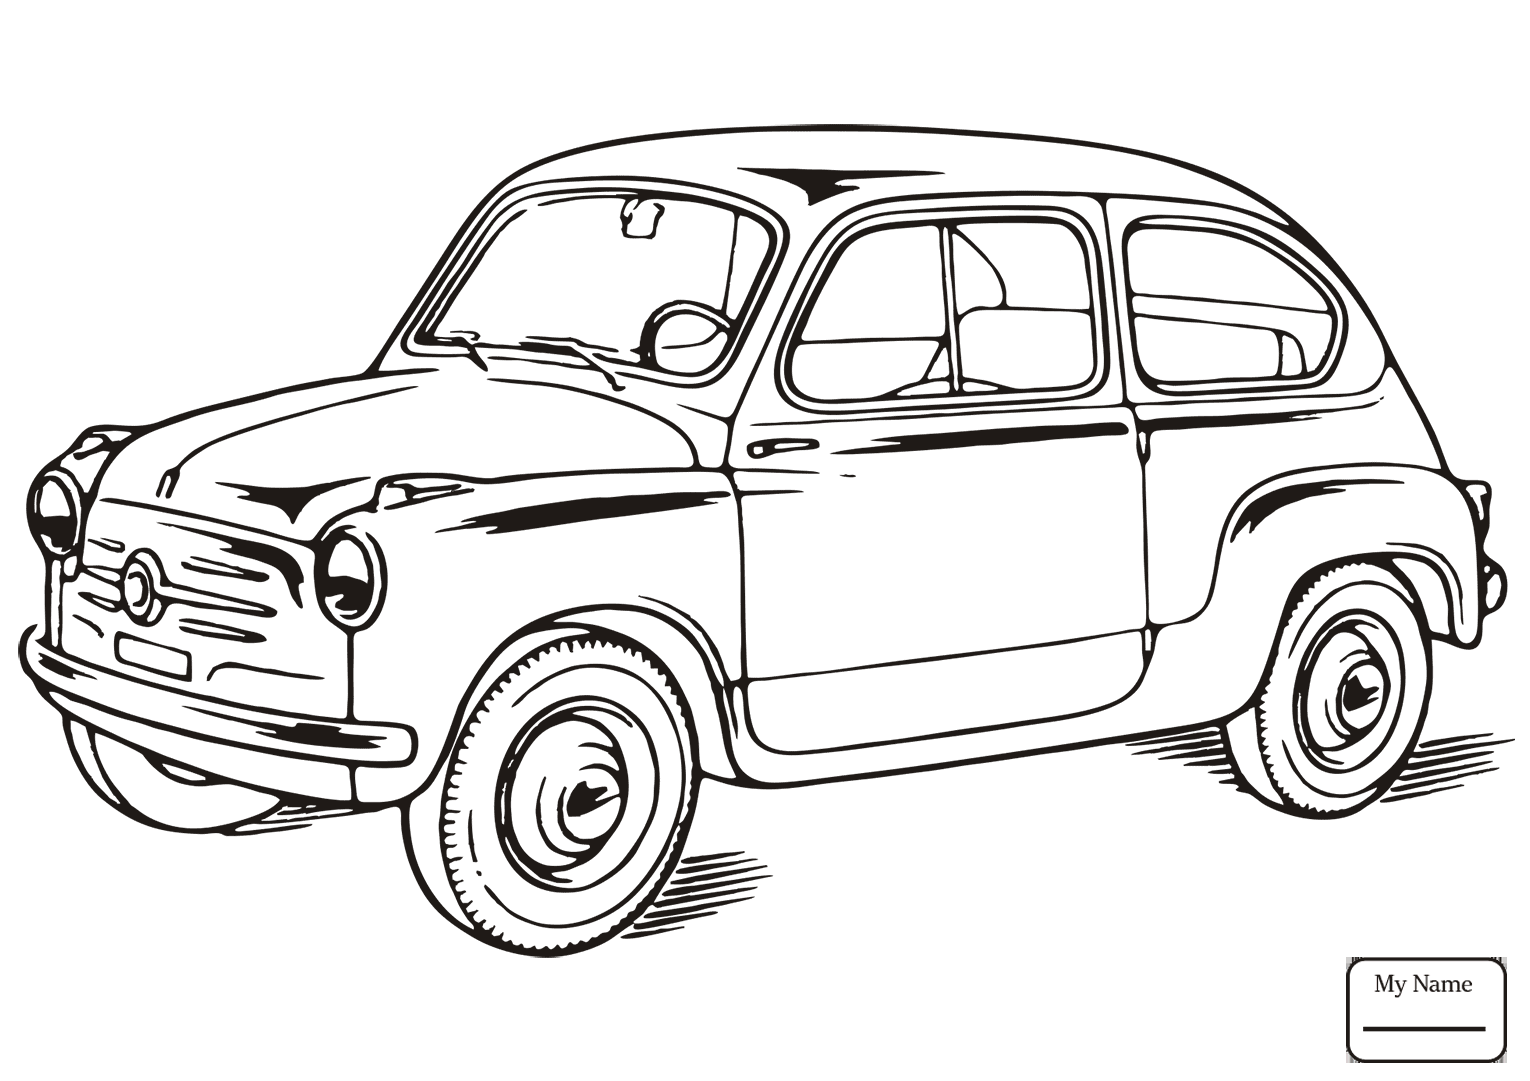 Cadillac Coloring Pages at GetColorings.com  Free printable colorings